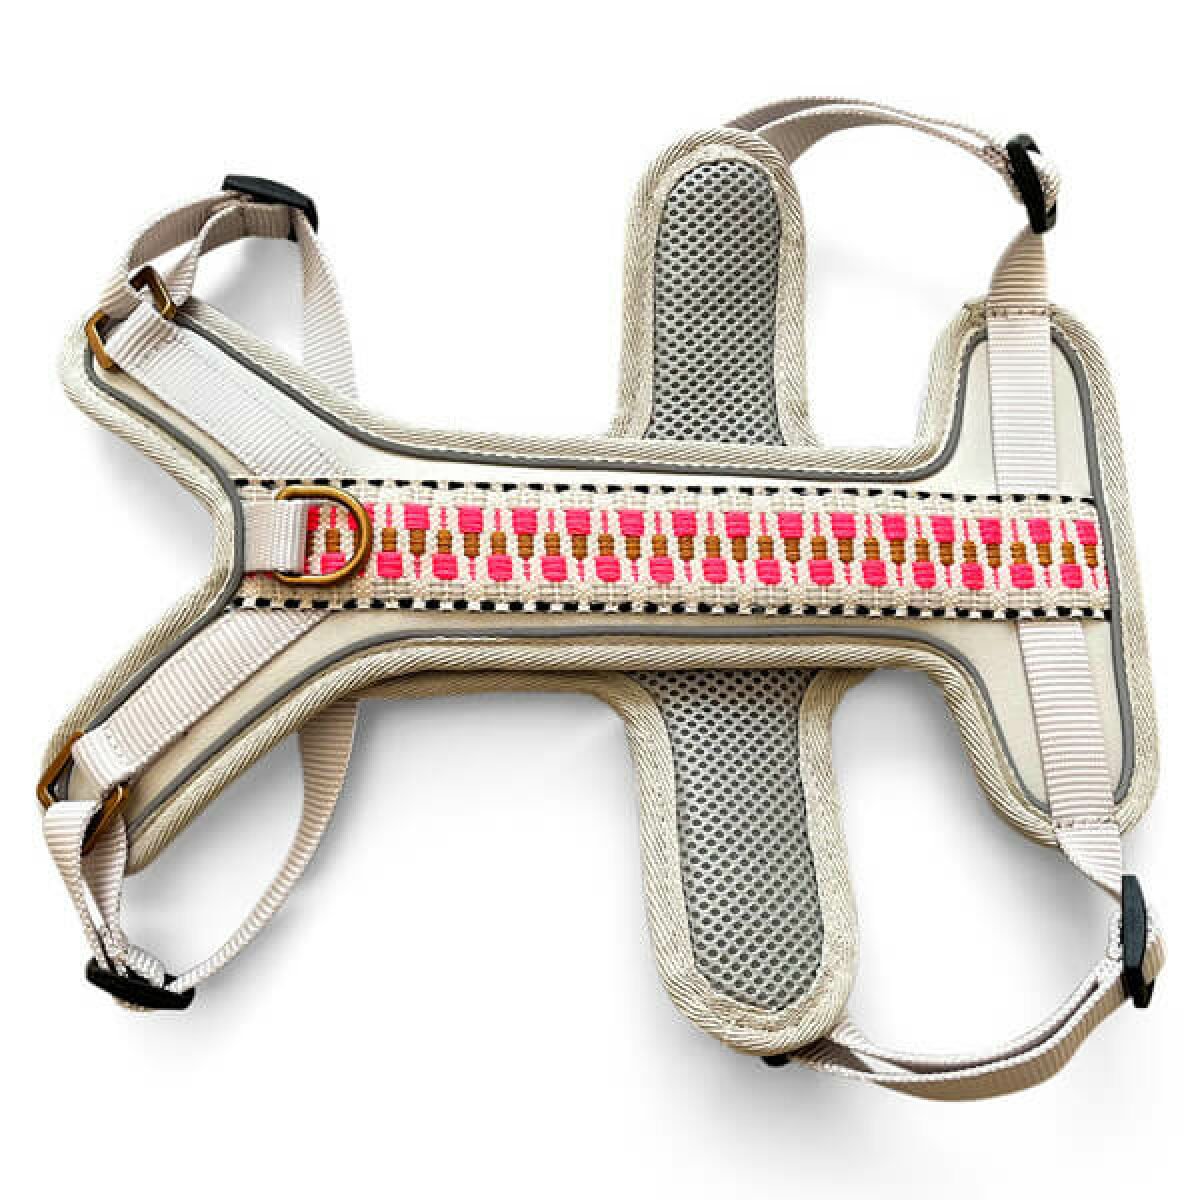 Premium padded dog harness Tres Chic in pink/beige front